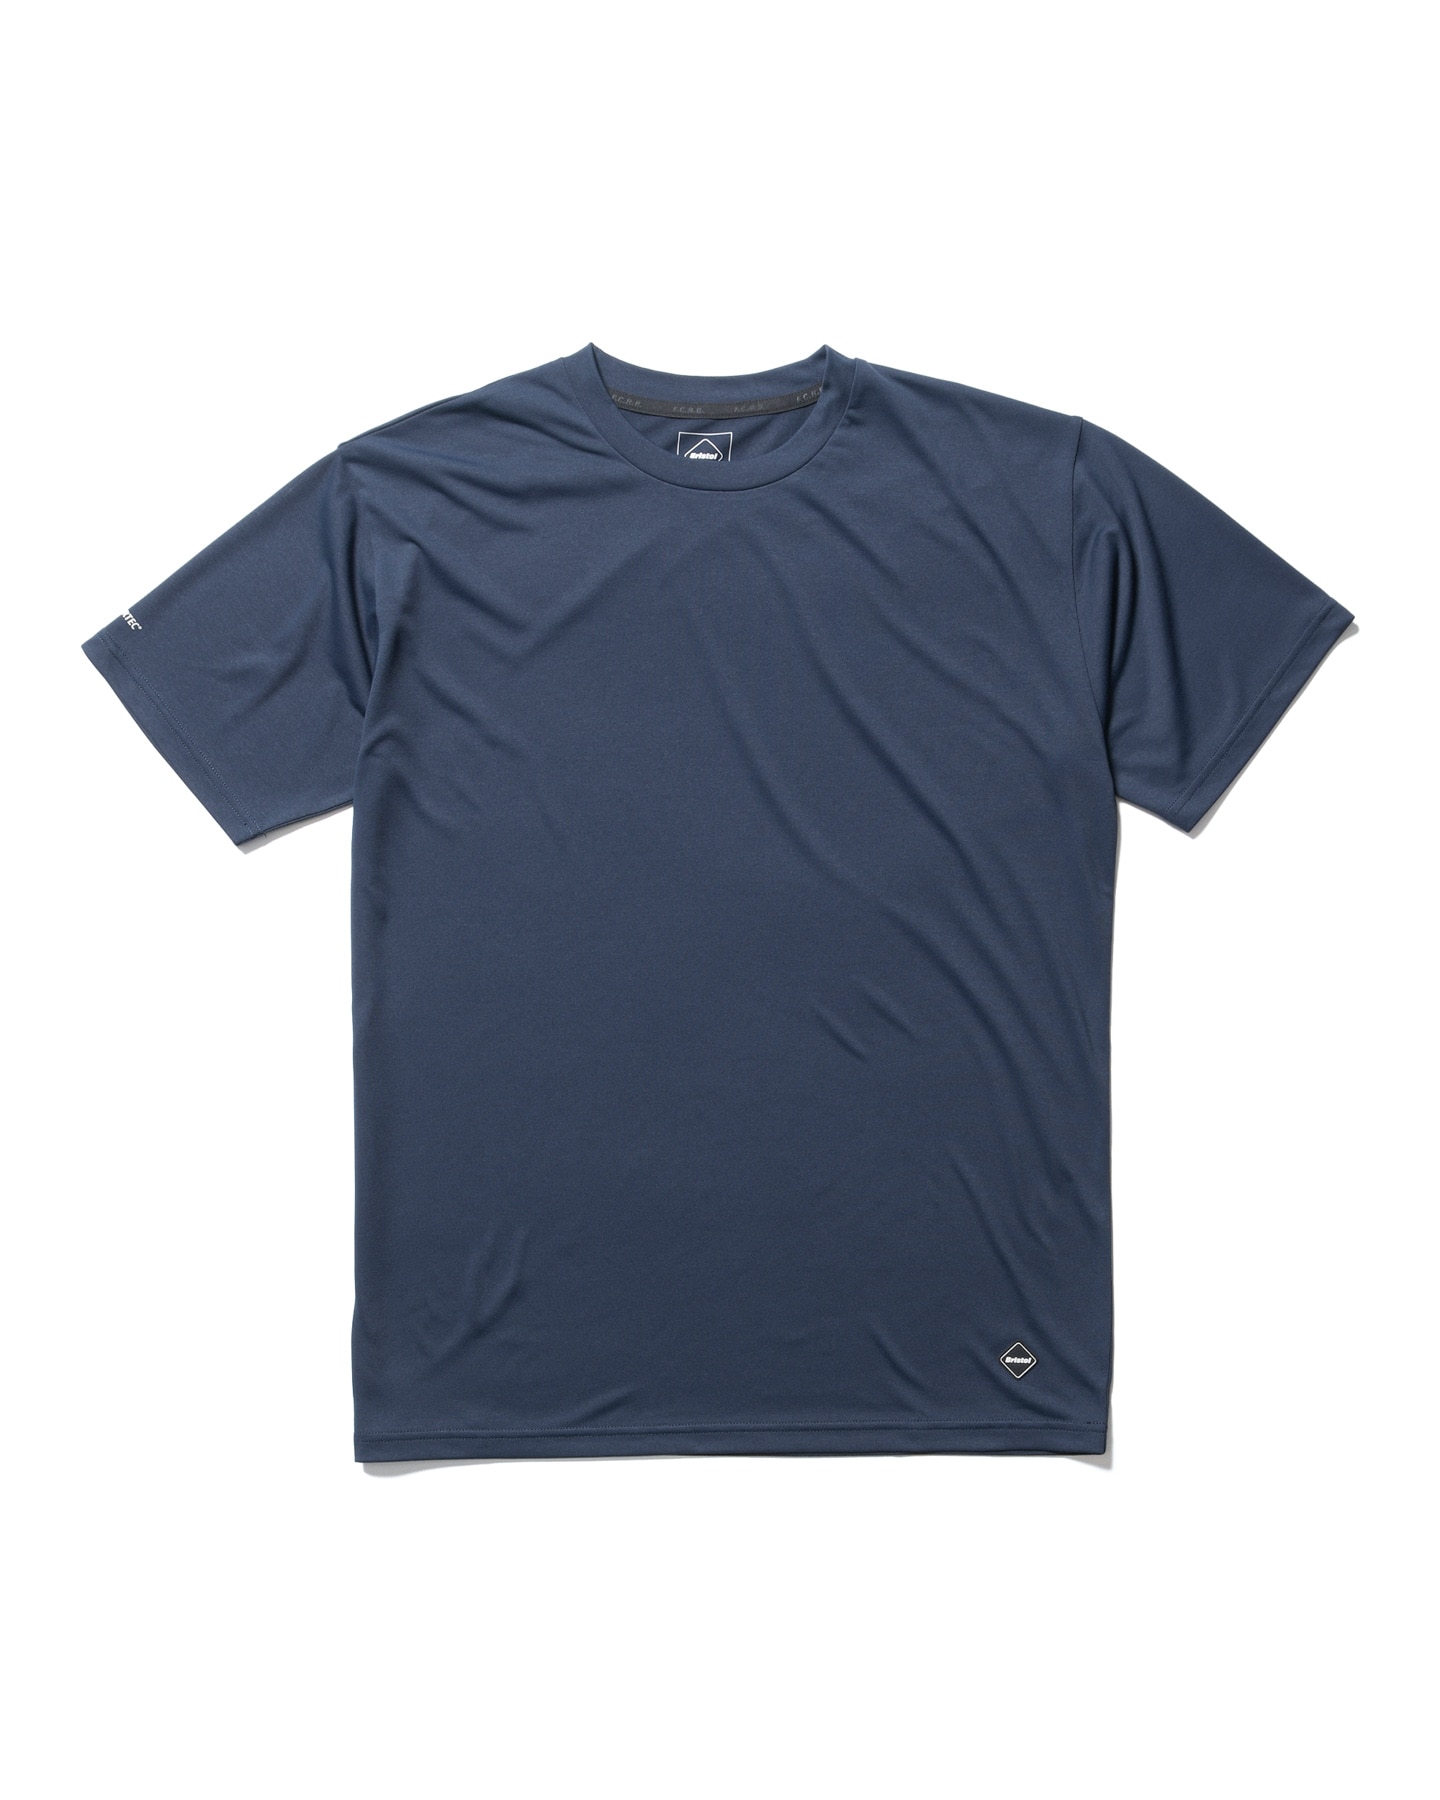 SOPH. | POLARTEC POWER DRY 3PACK TEE(XL 3COLOR):